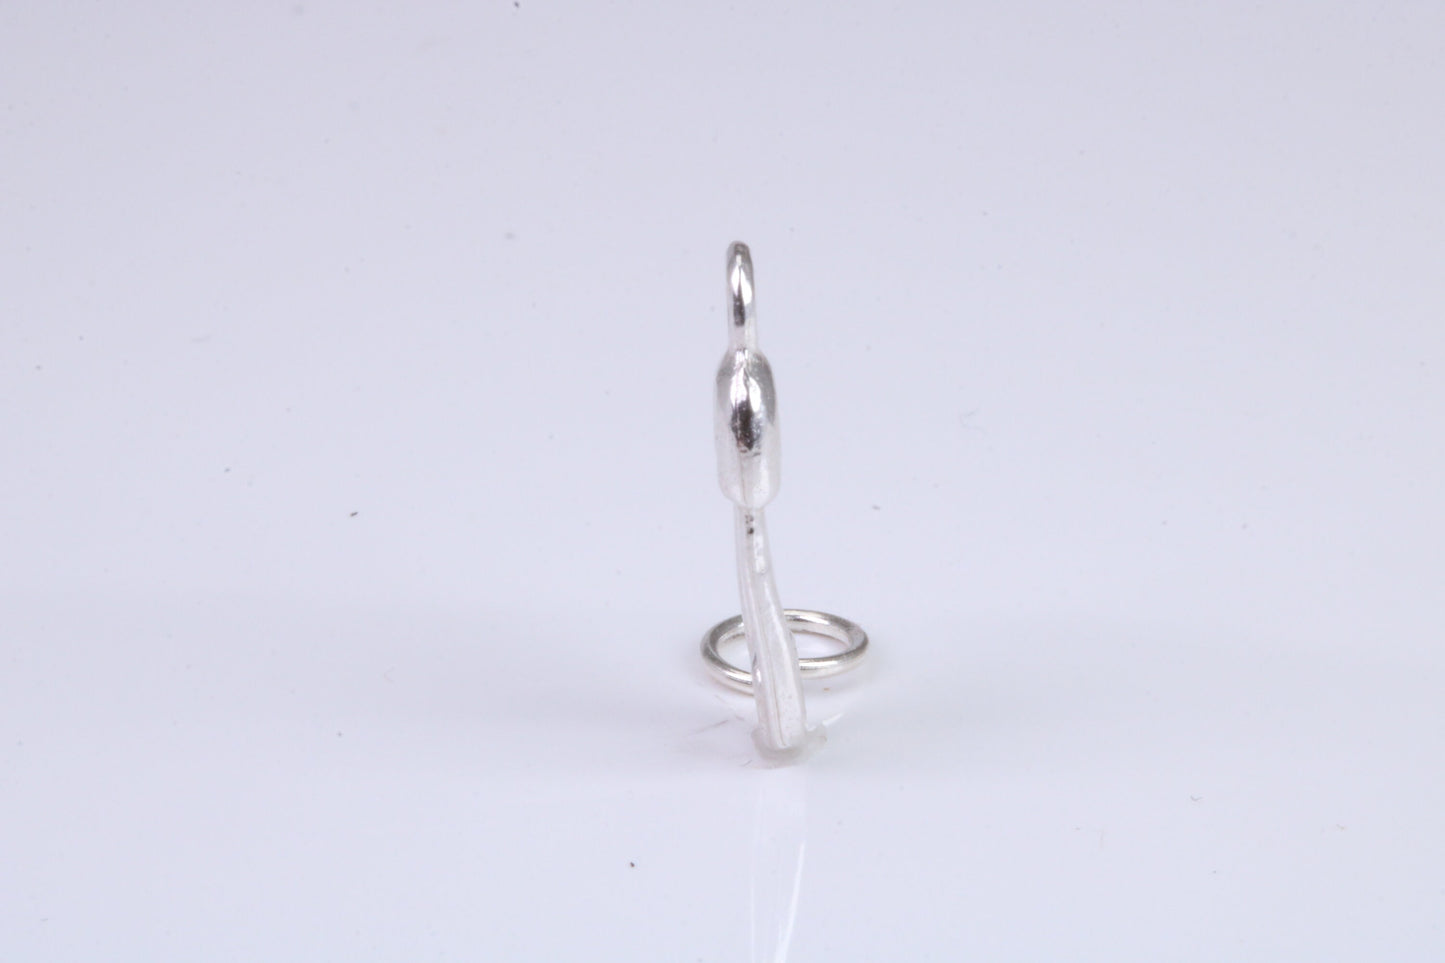 Safety Pin Charm, Traditional Charm, Made from Solid 925 Grade Sterling Silver, Complete with Attachment Link